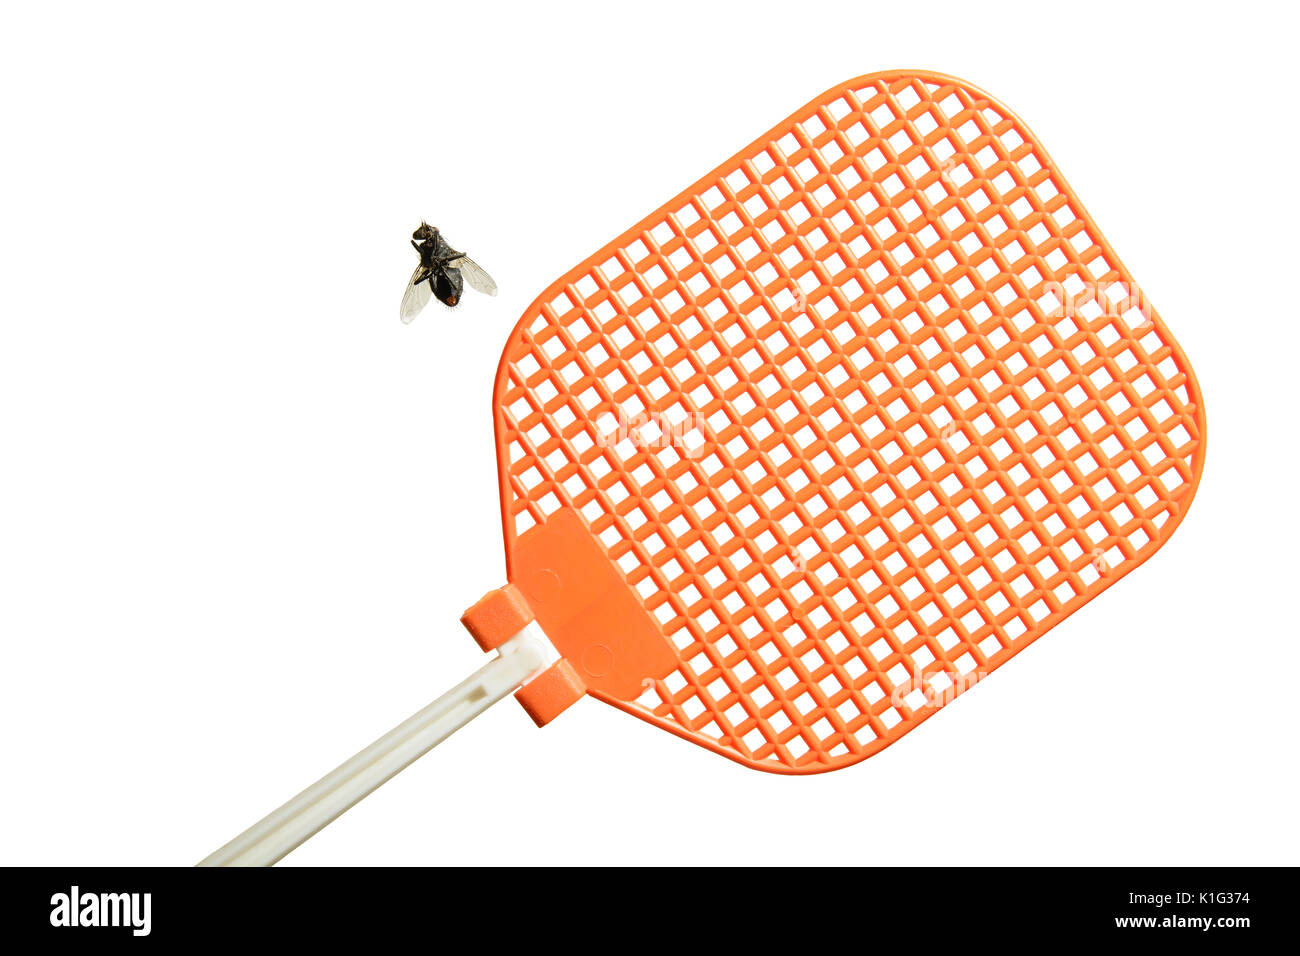 Dead flesh fly is lying on its back next to an orange fly swatter. Isolated on white background. Stock Photo